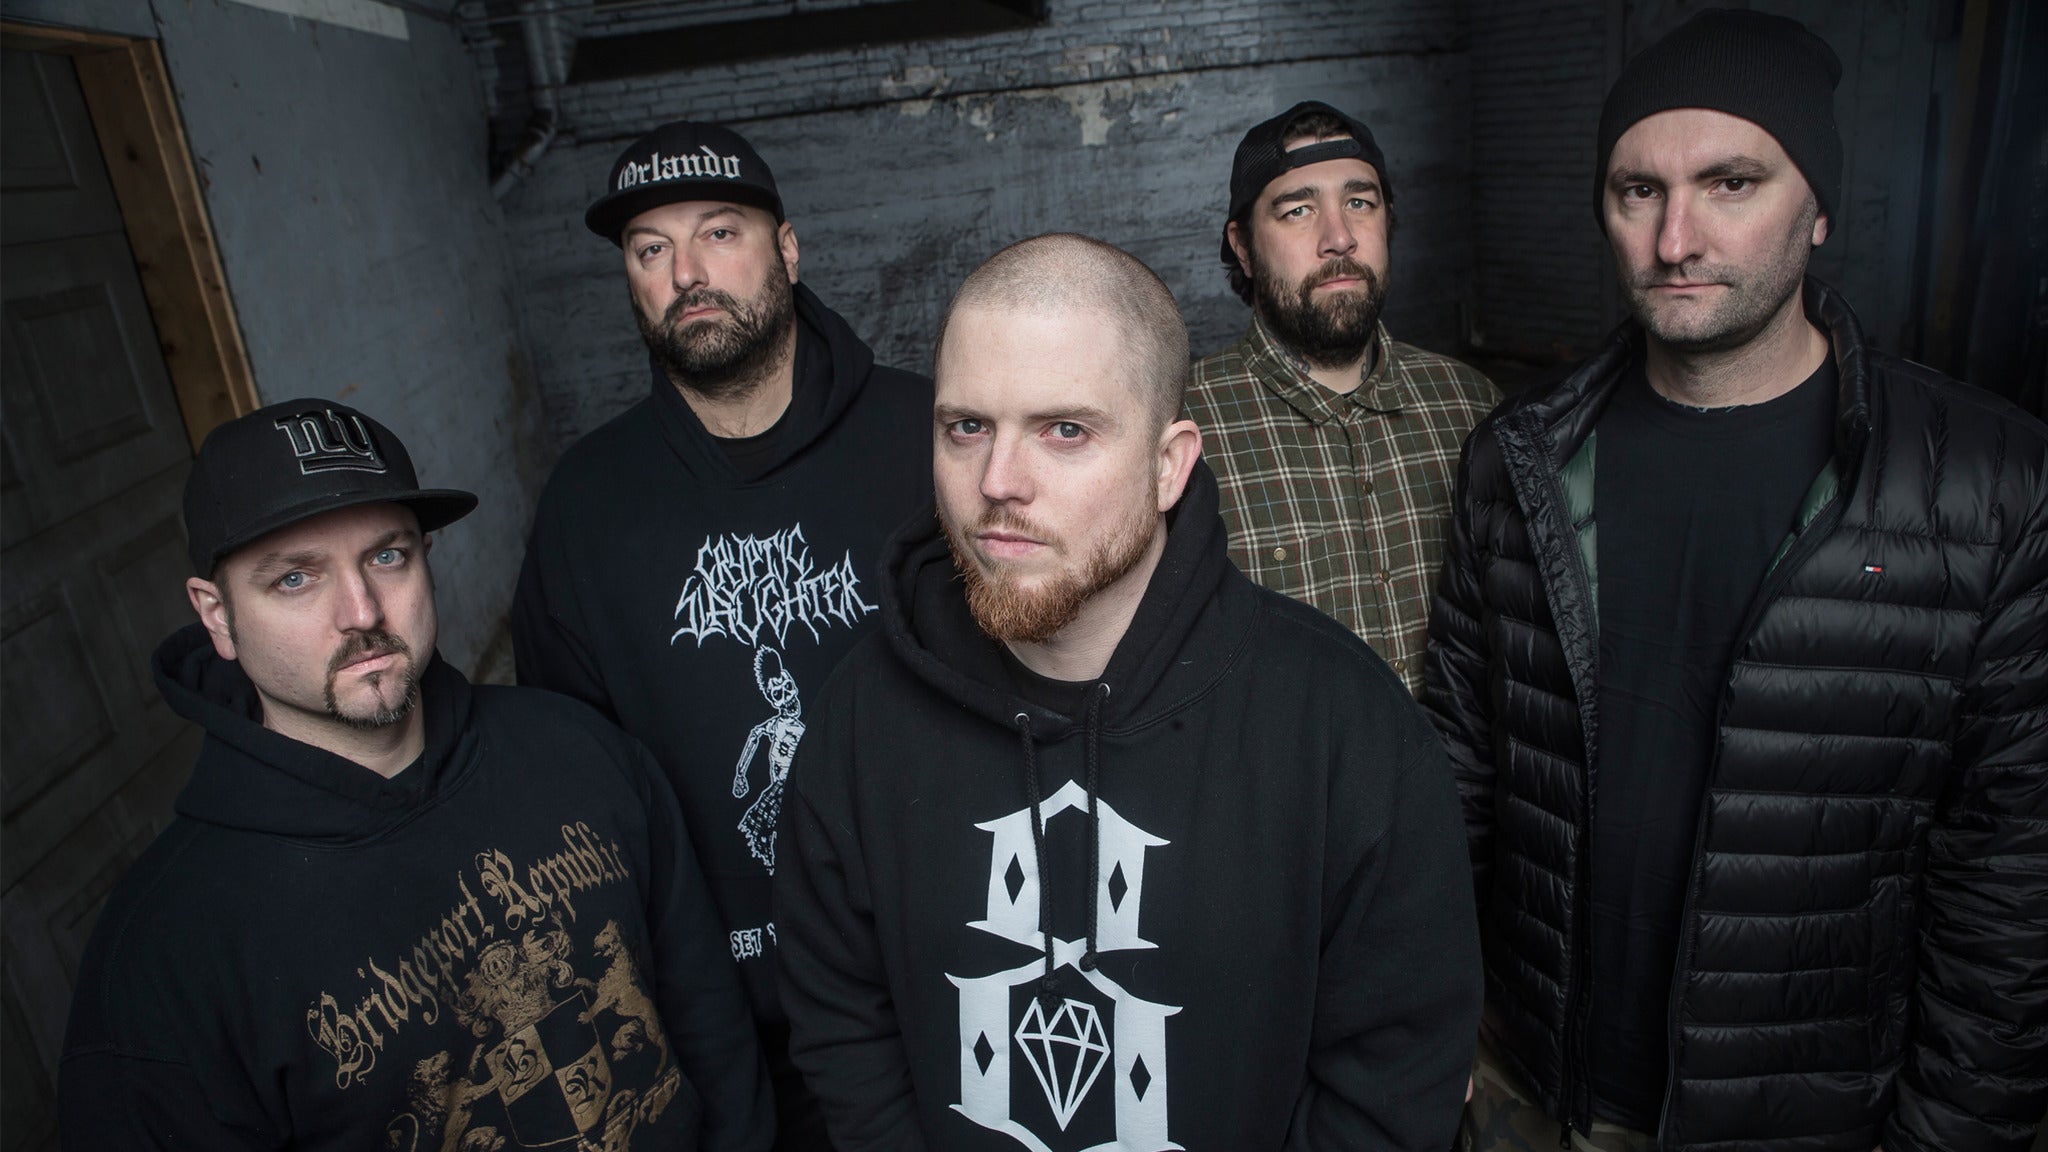 Image used with permission from Ticketmaster | Hatebreed tickets